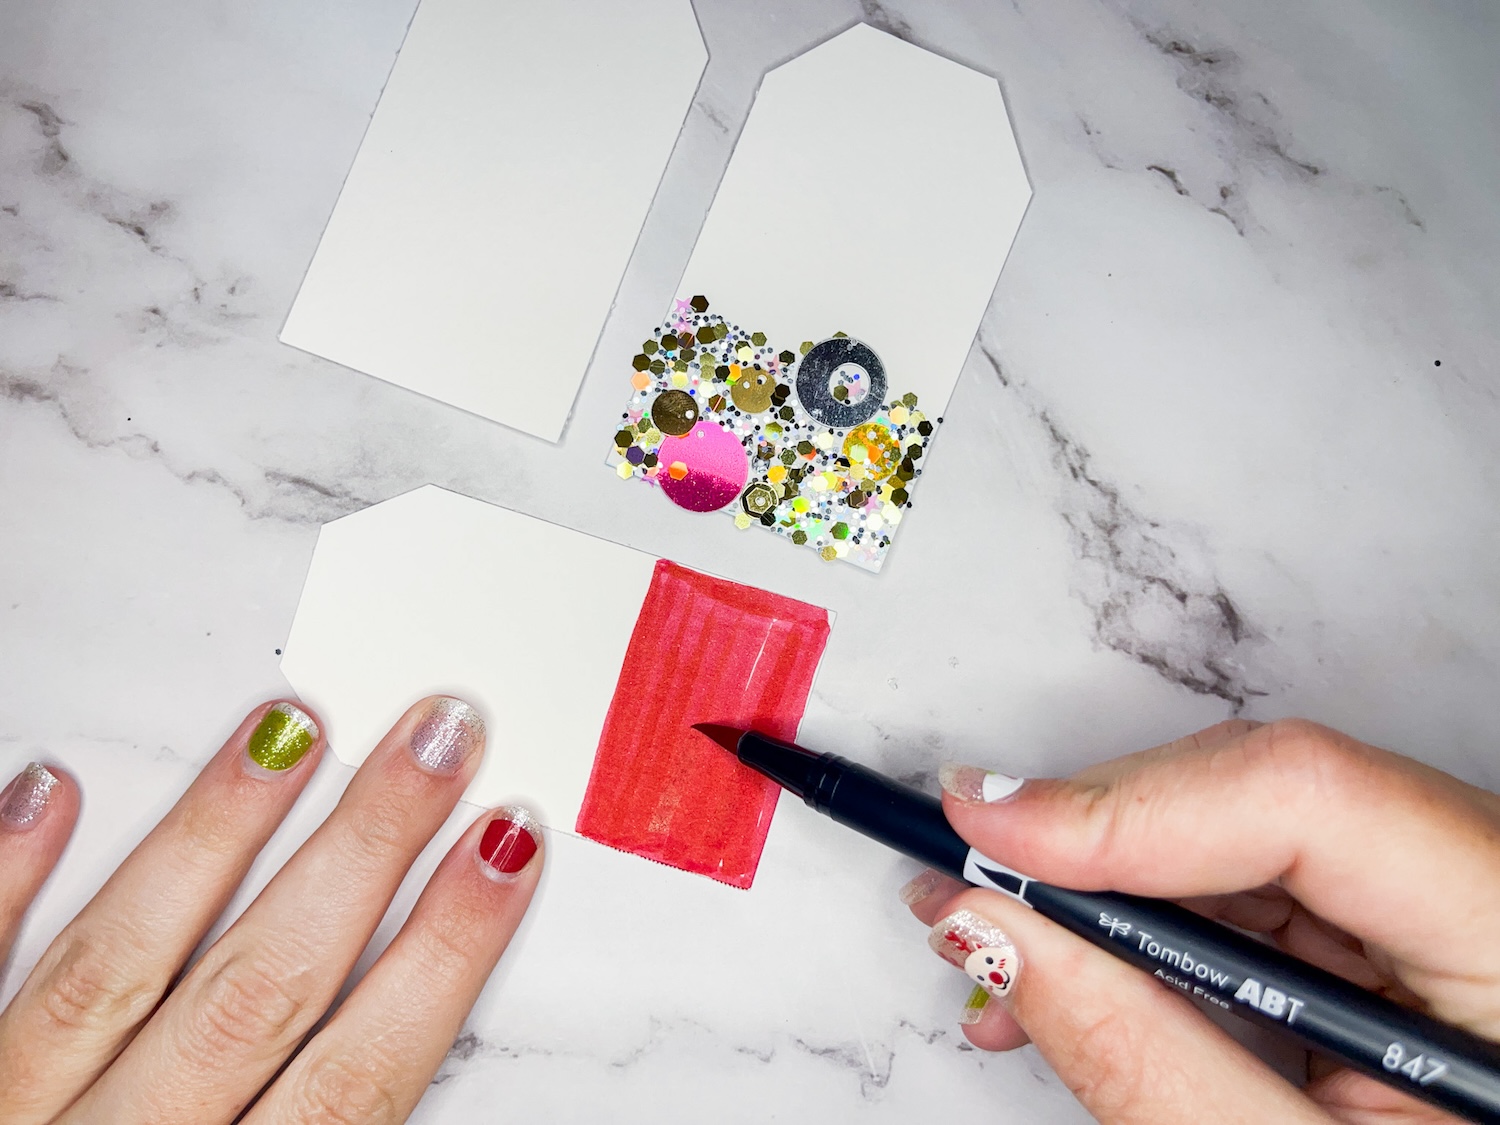 Learn how to make your own DIY Glitter Gift Tags following this tutorial by @studiokatie on the @tombowusa blog!